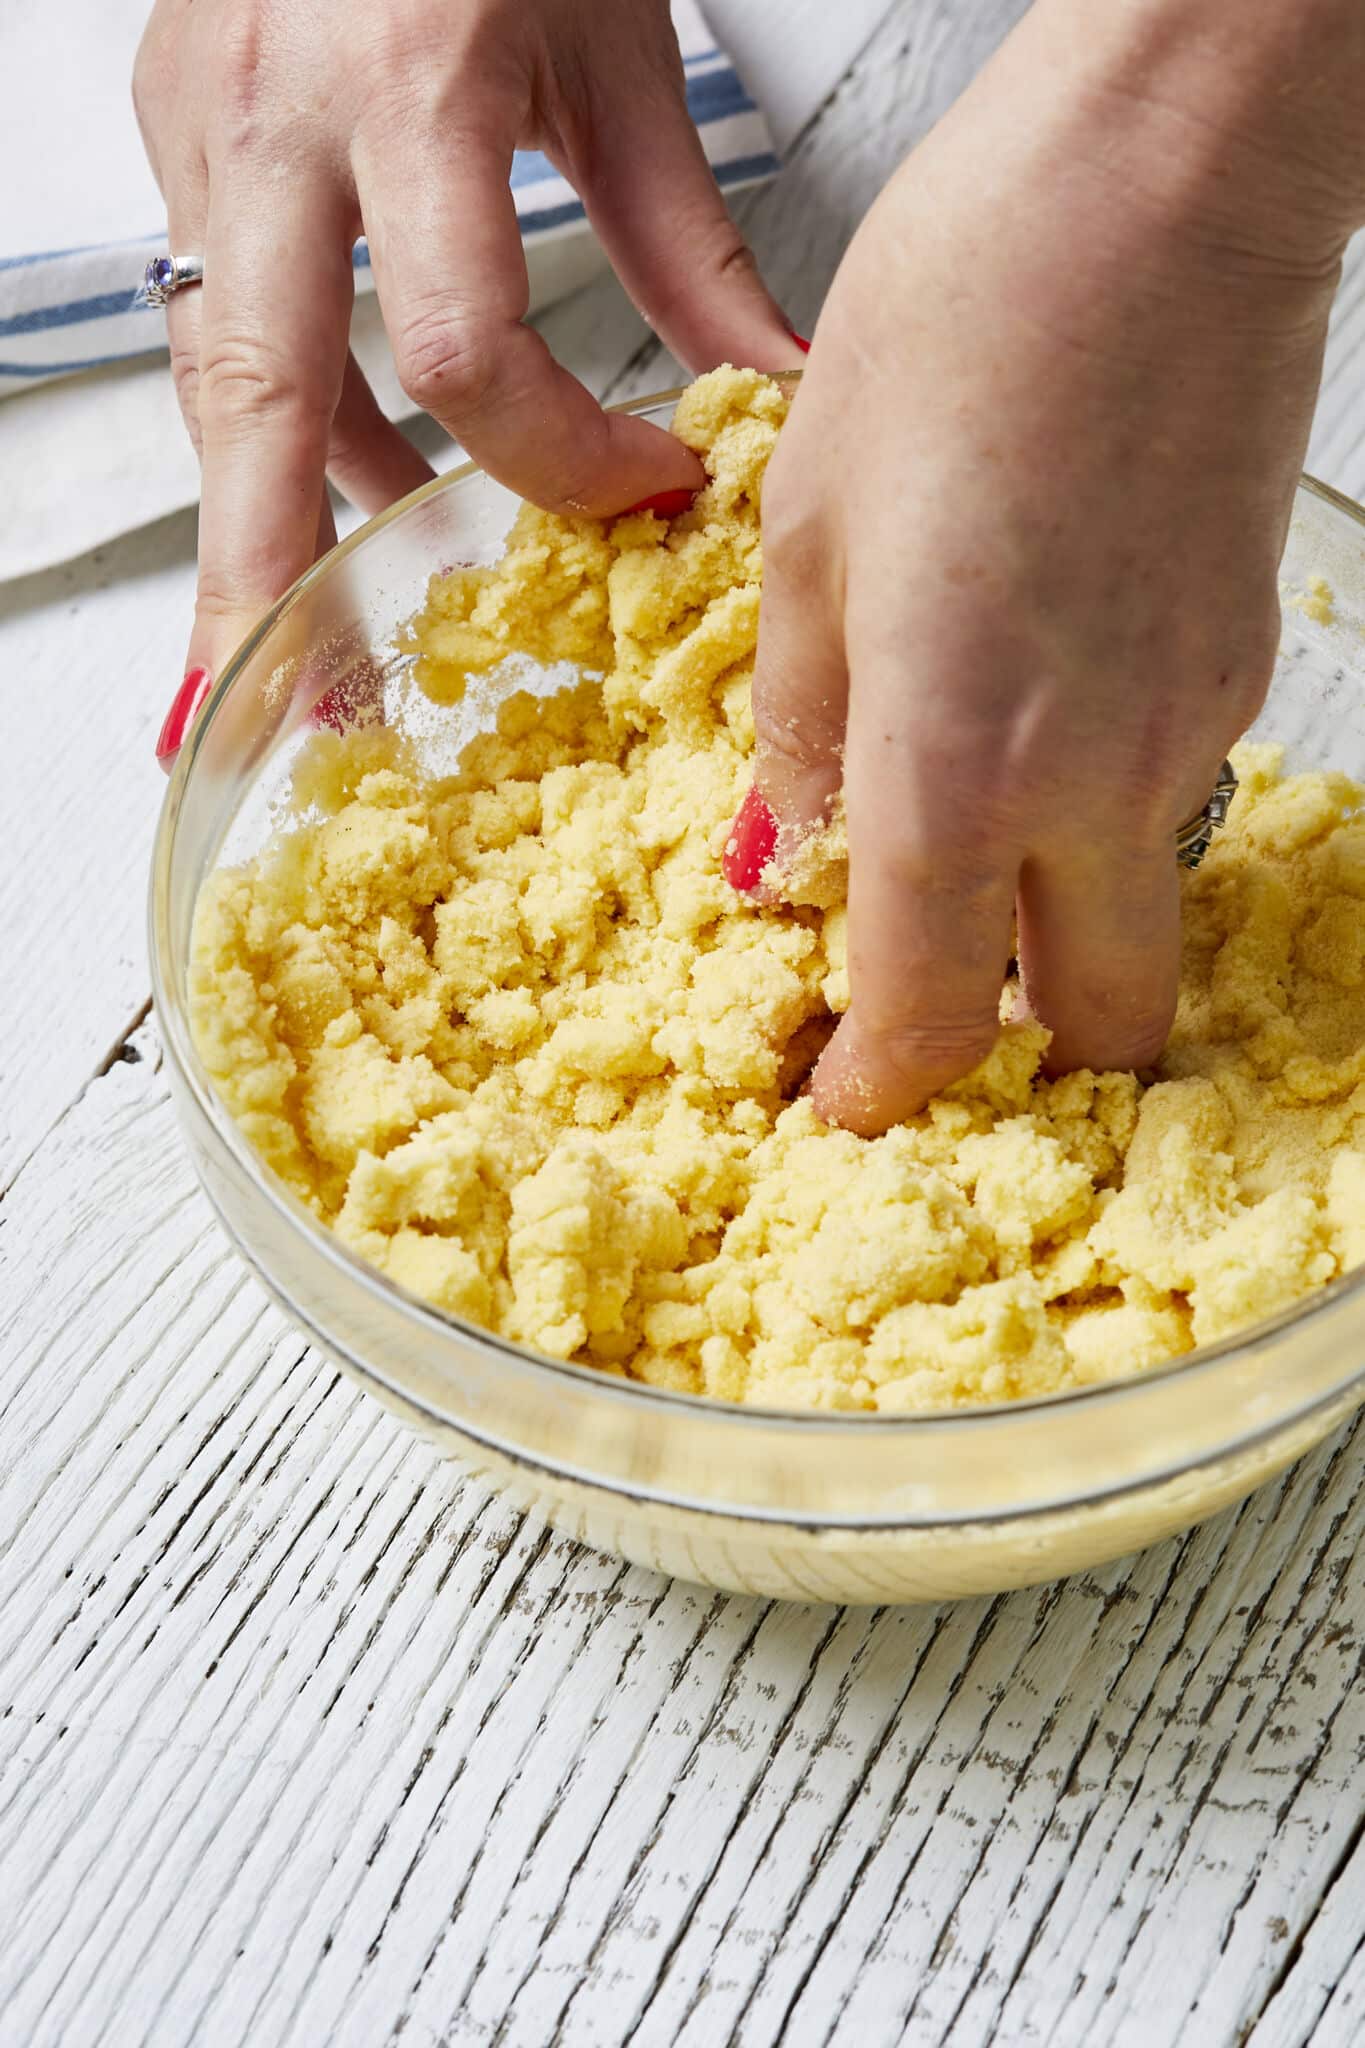 Step-by-step instructions on making semolina pasta. Hand mix semolina flour with warm water in a glass mixing bowl instead of using a food processor. 